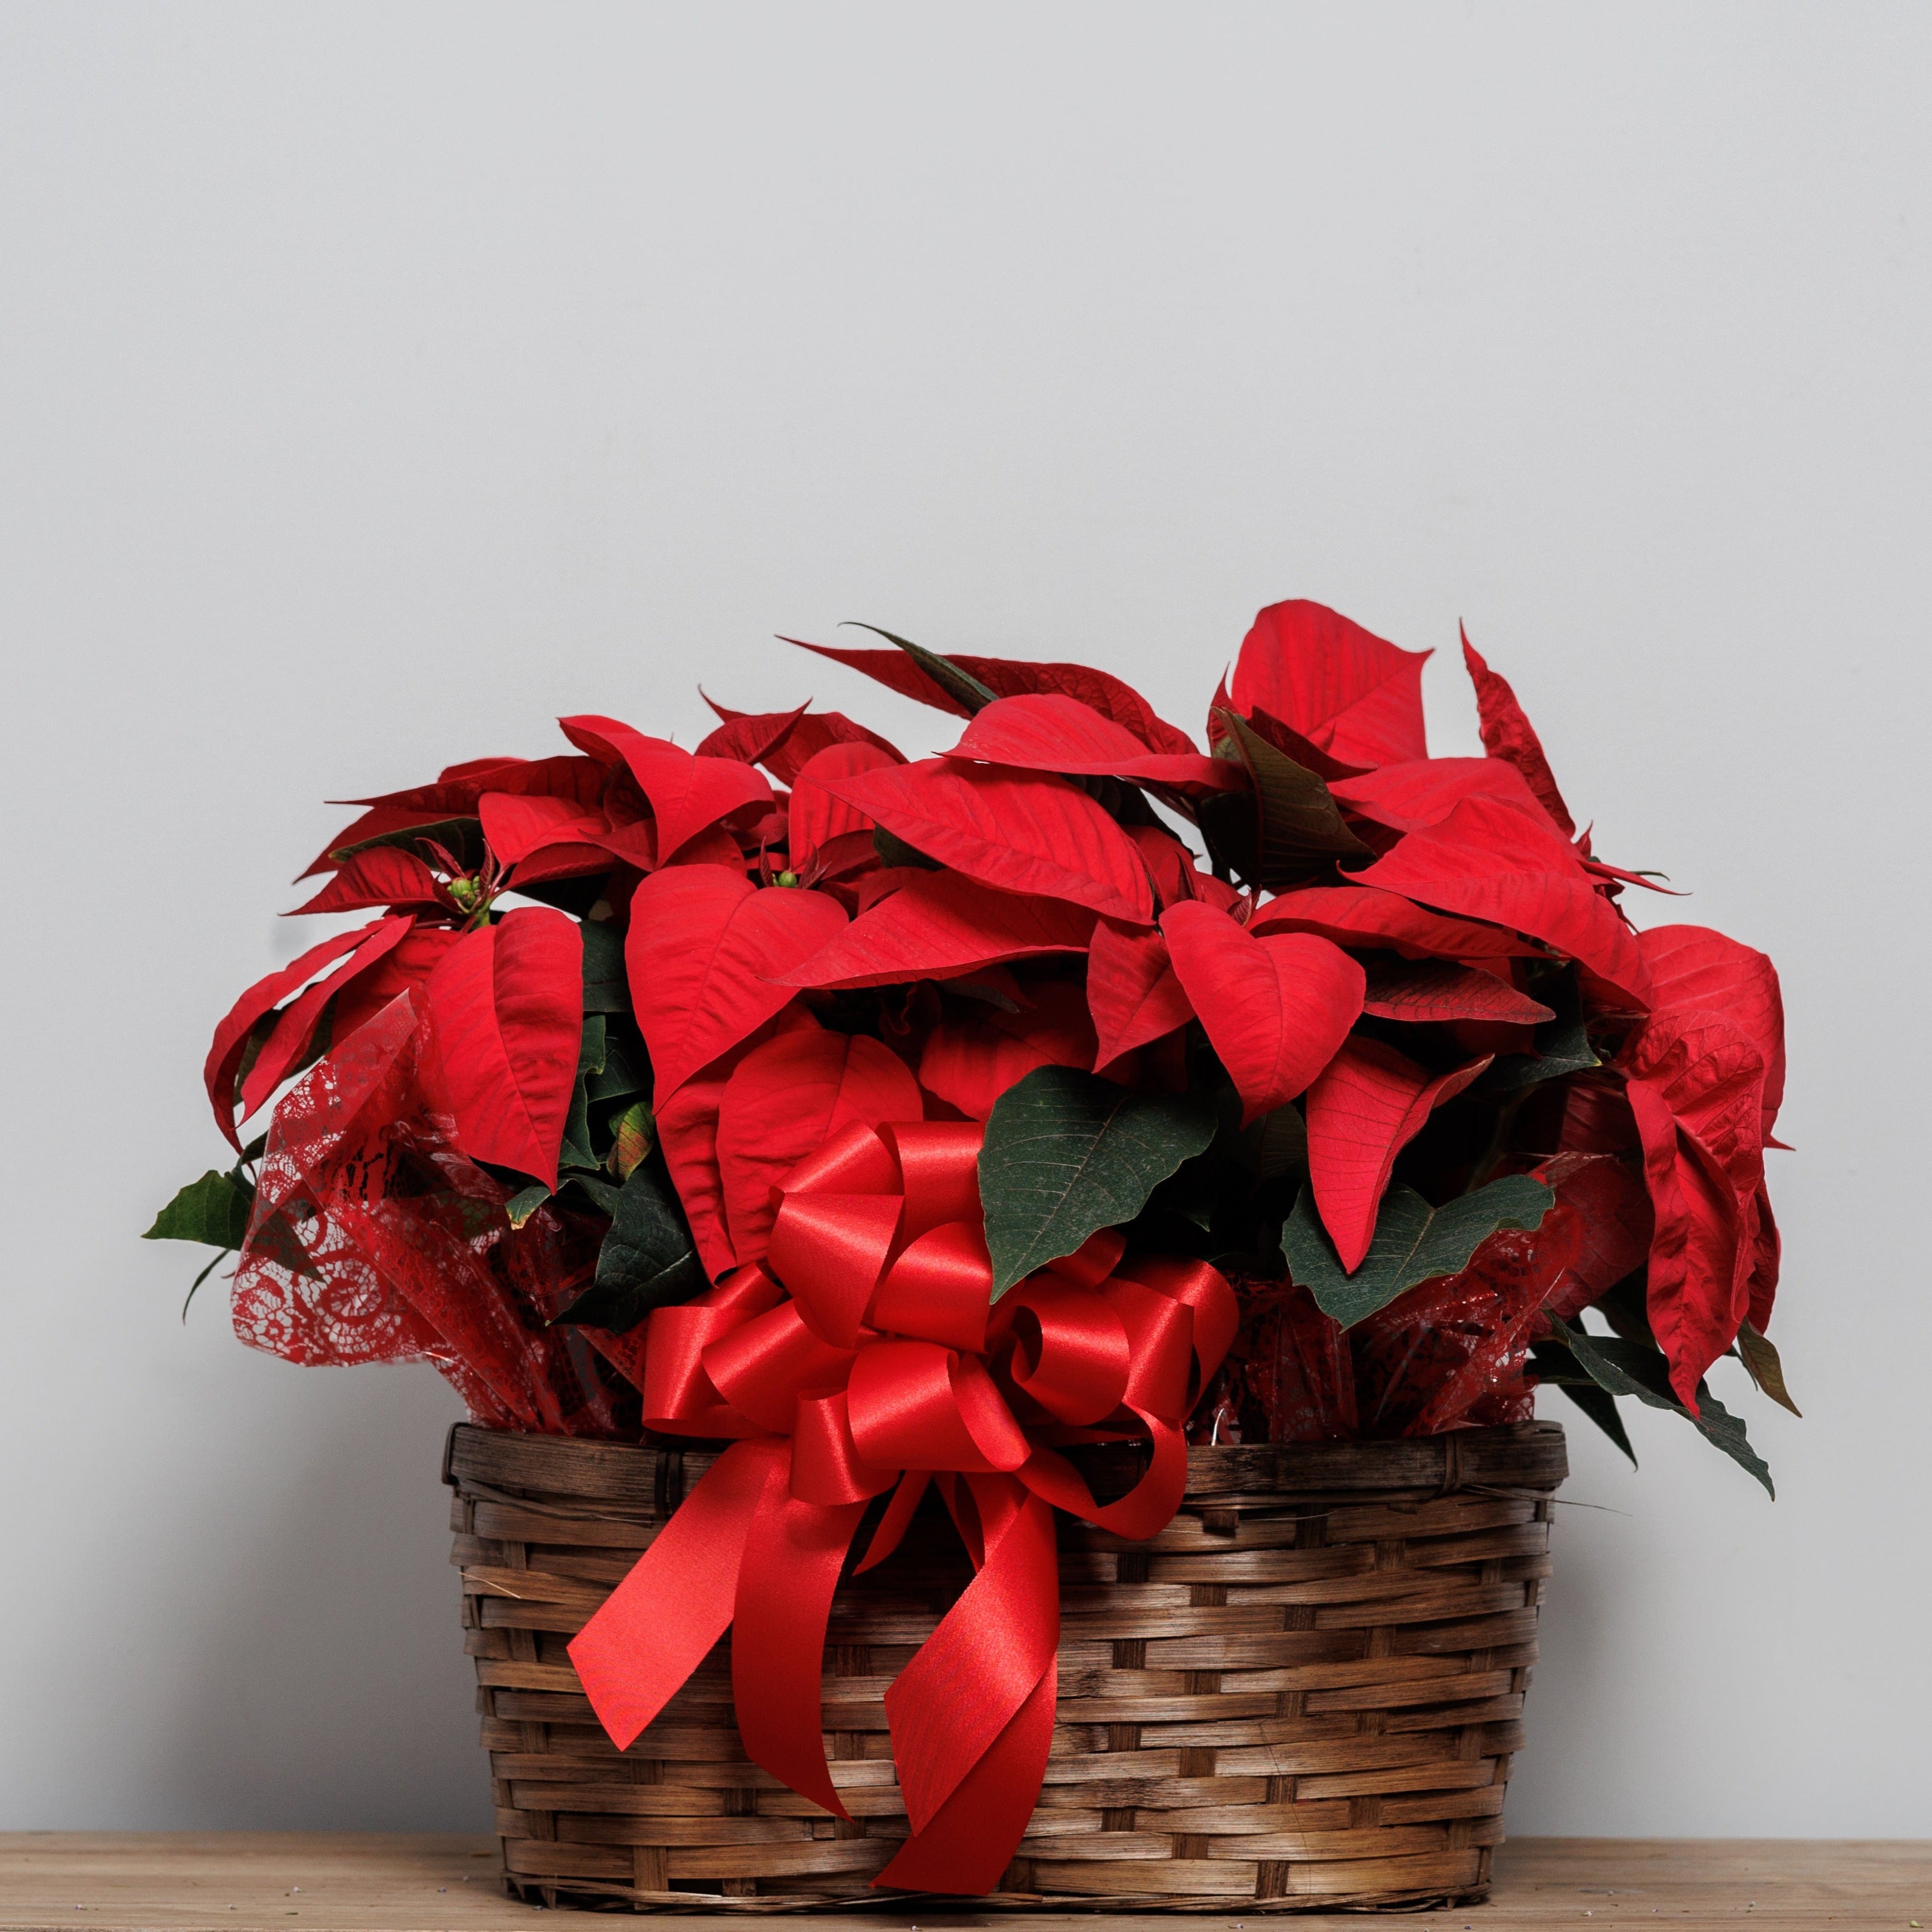 2 red poinsettias in a peanut basket with a bow.